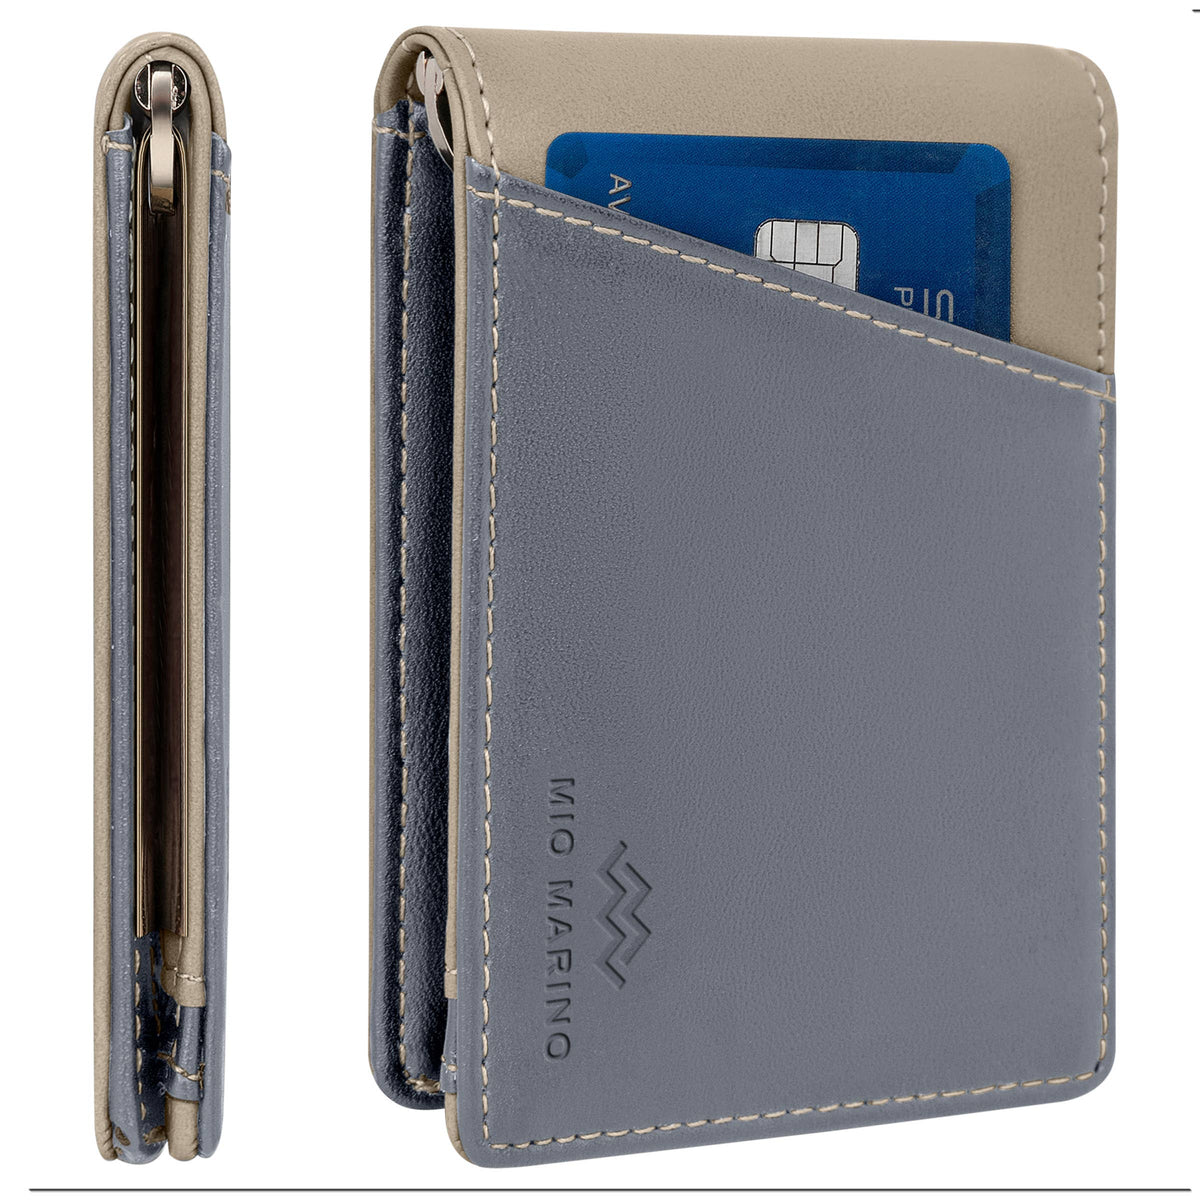 Mio Marino - Men's Slim Bifold Wallet with Quick Access Pull Tab: Carbon Black/Gray - WALLET - Synik Clothing - synikclothing.com